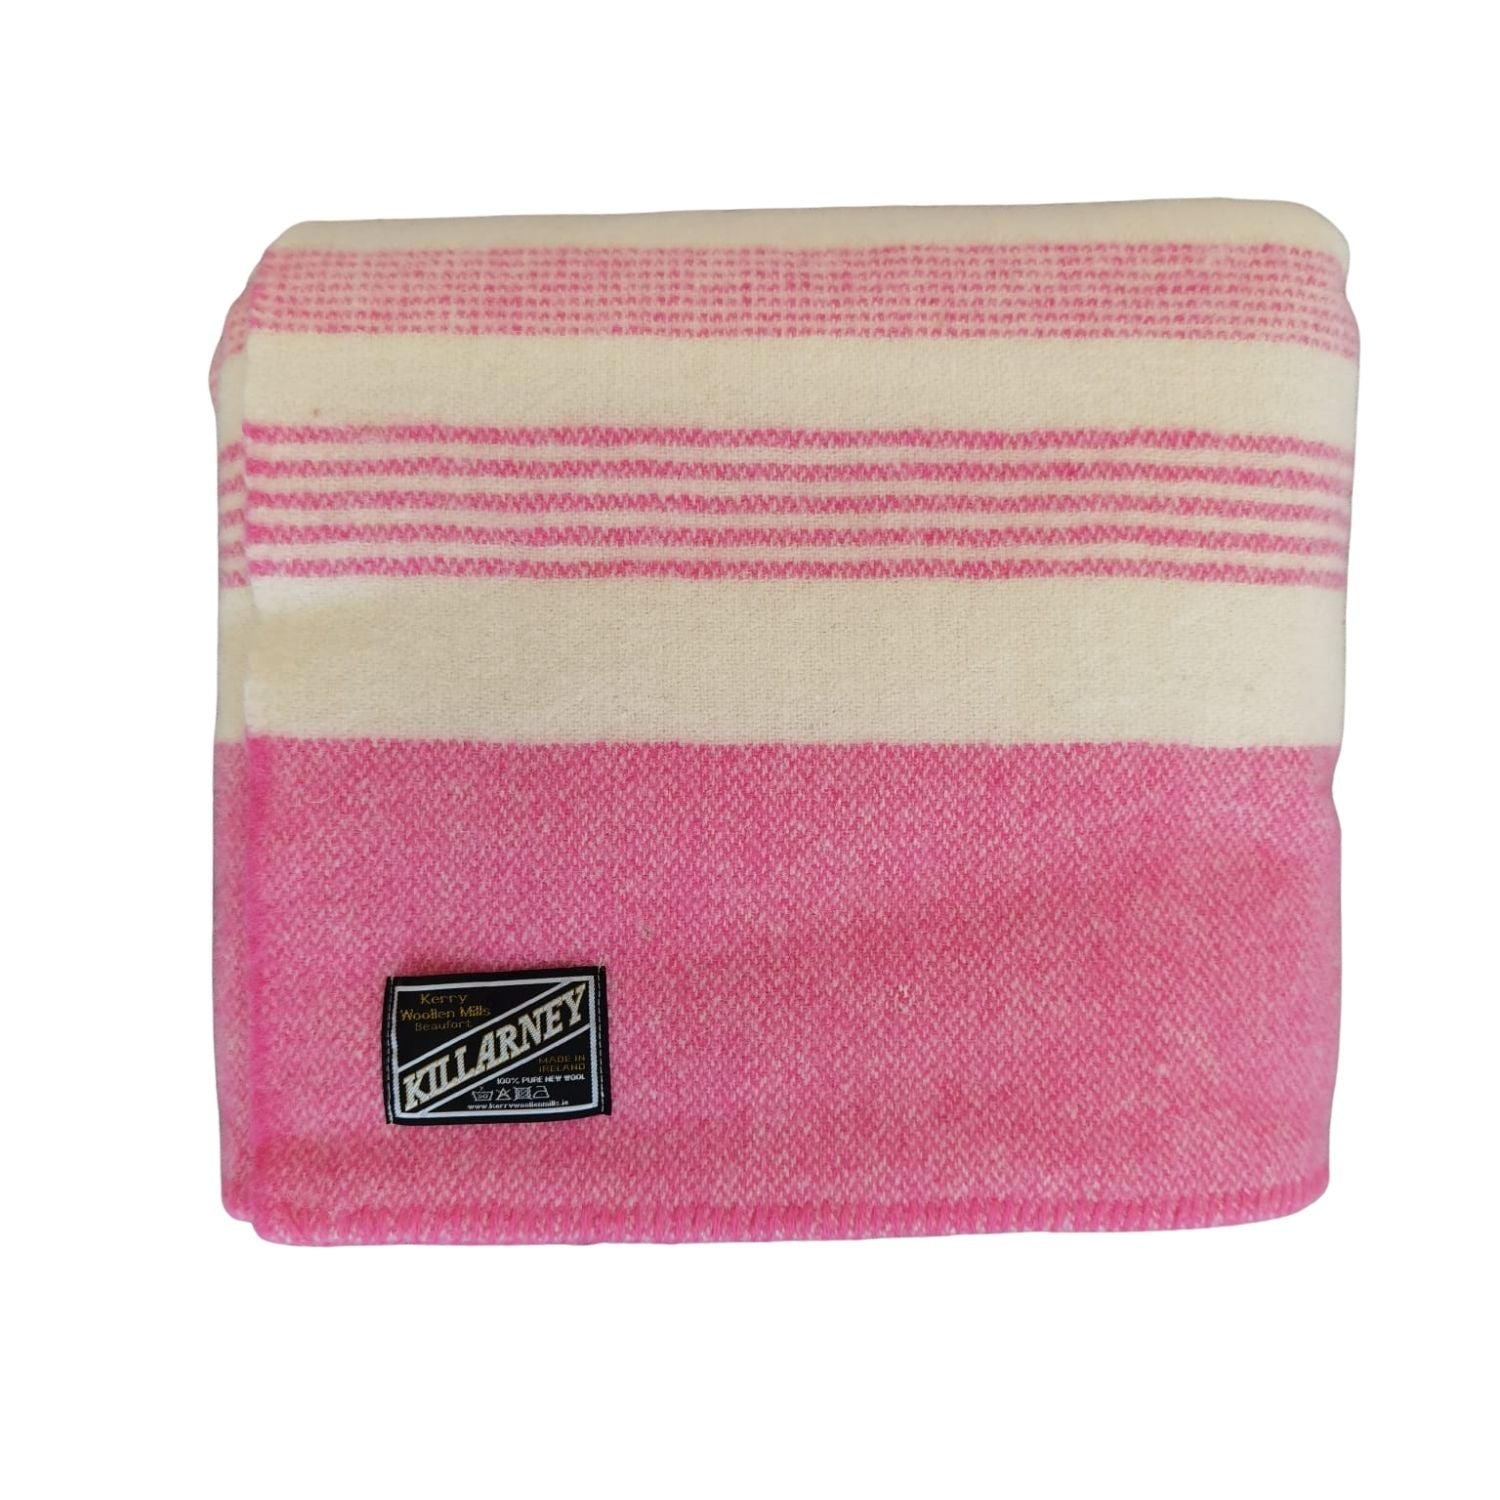 Kerry Woollen Mills 100% Pure Wool Blankets - White &amp; Pink 1 Shaws Department Stores